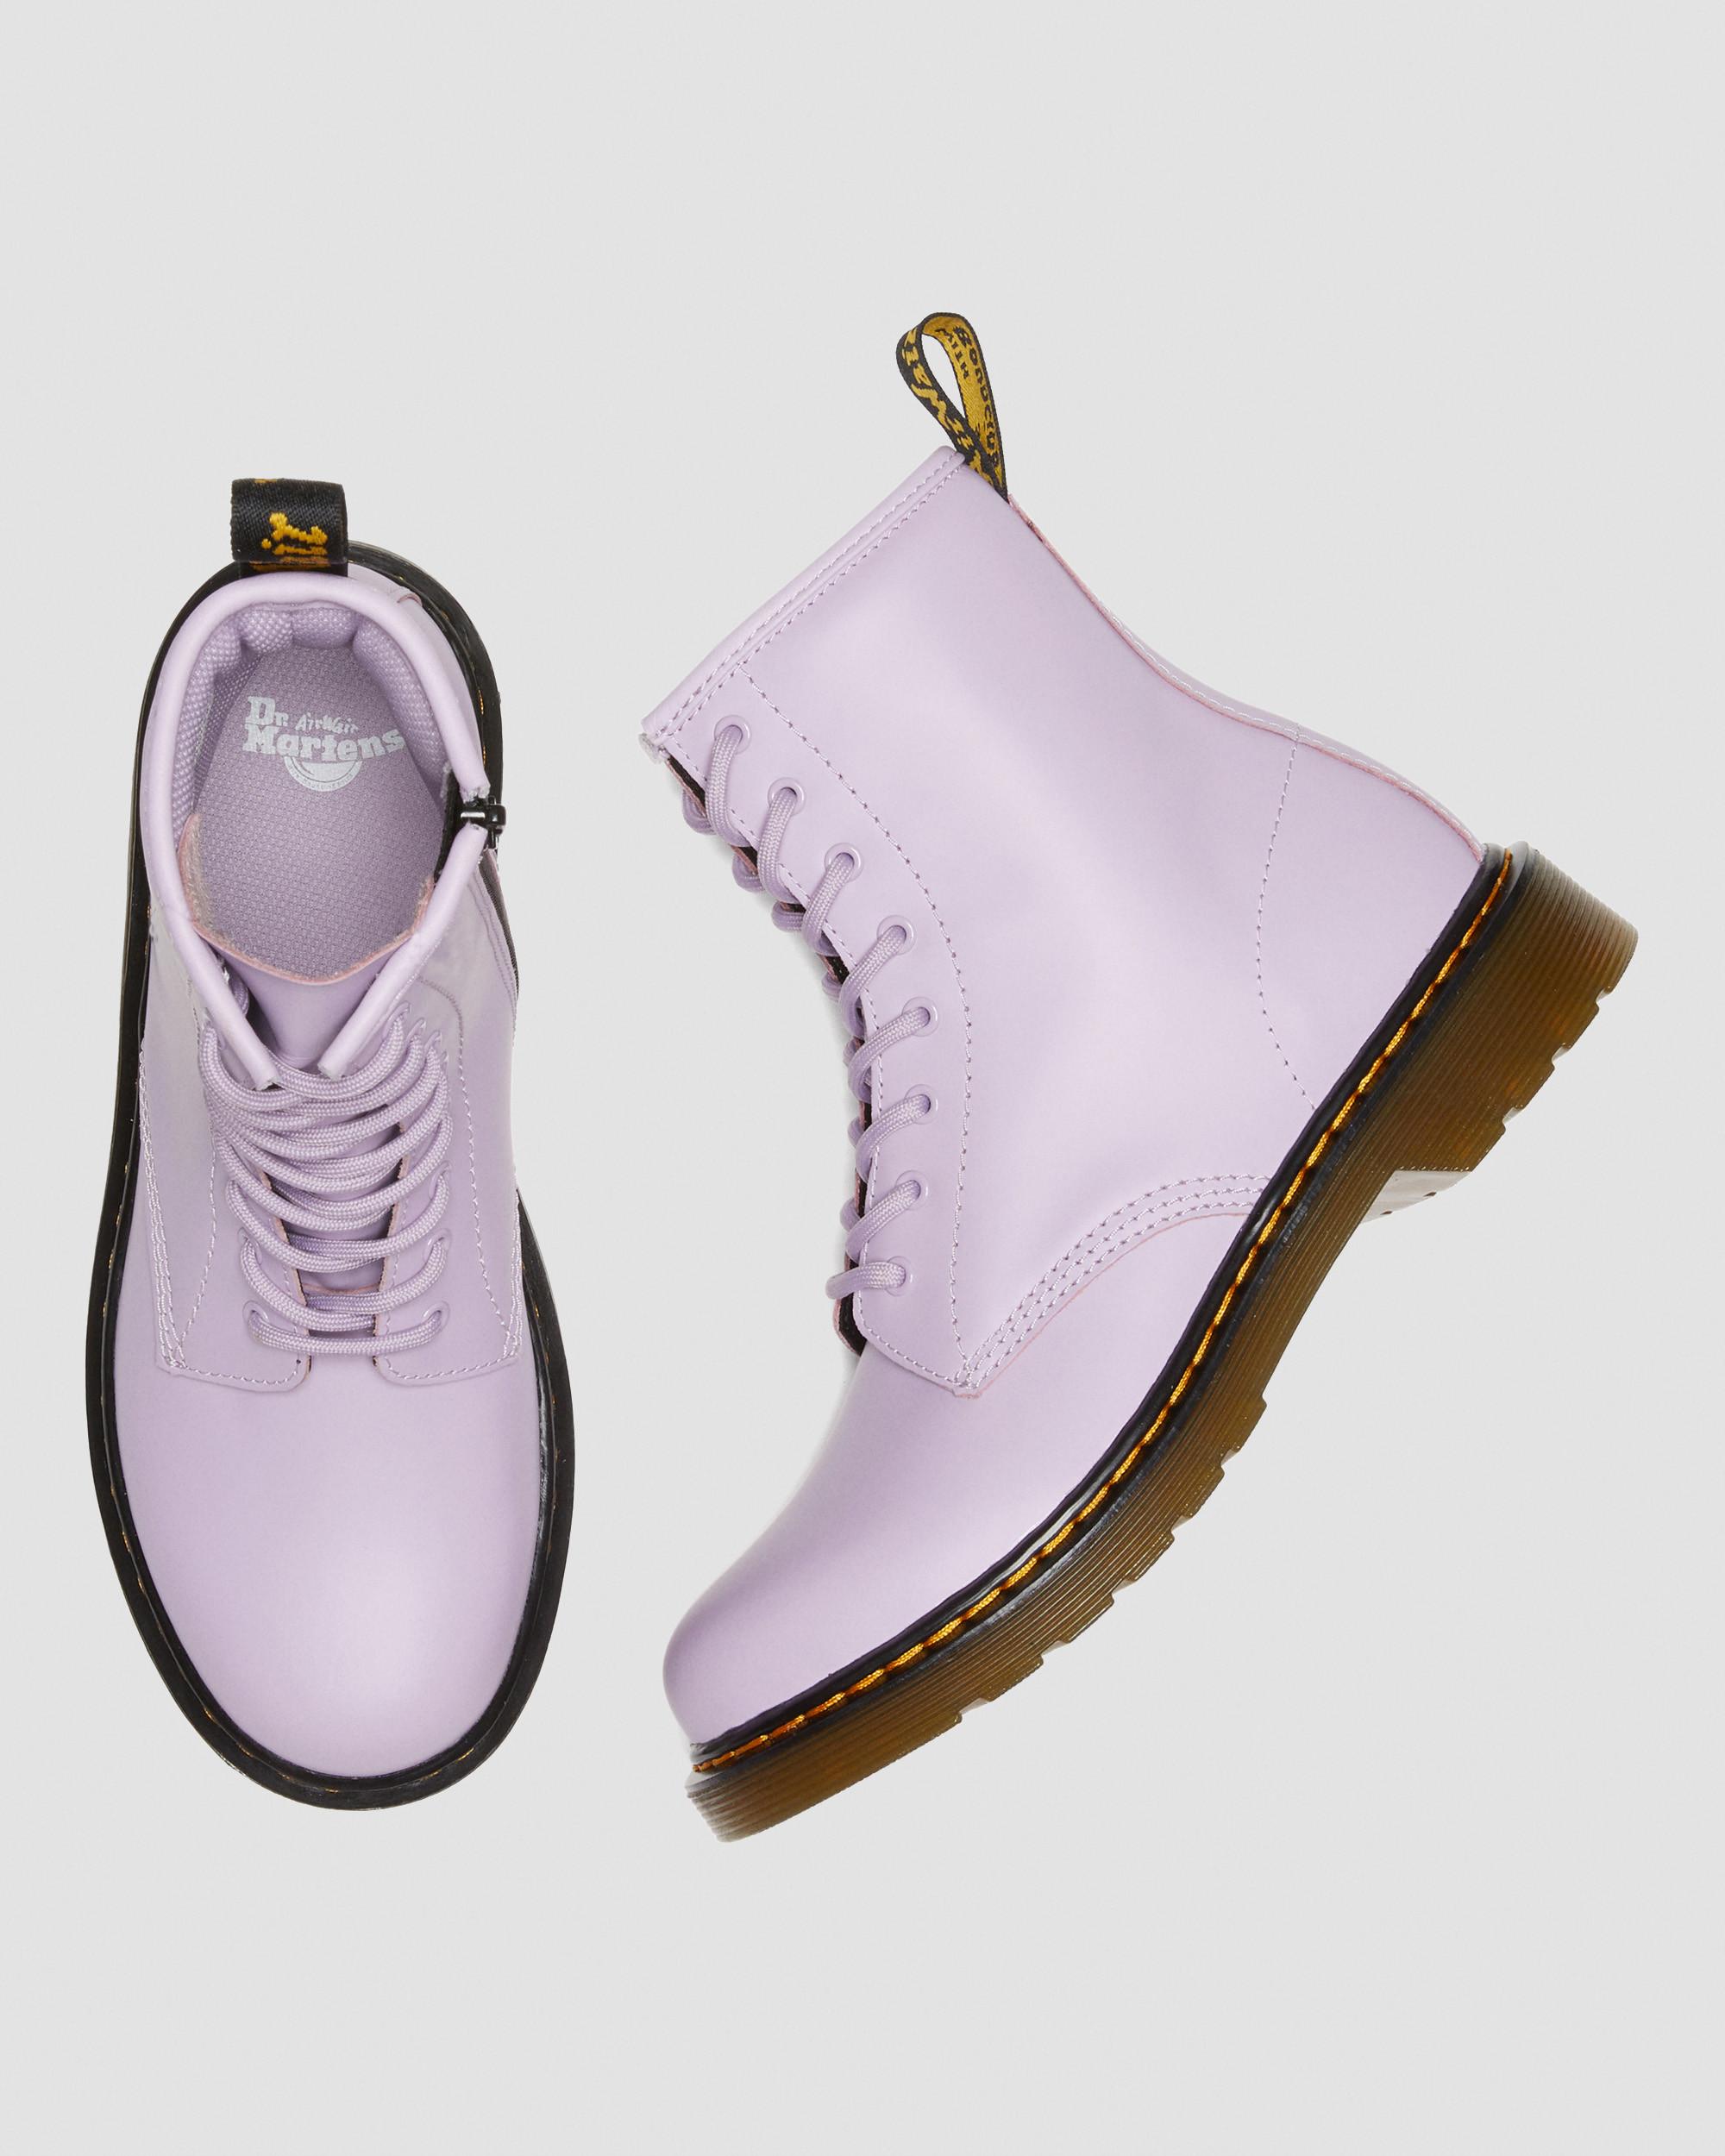 Youth 1460 Lilac Boots in Leather Lace Dr. Up Martens Romario 